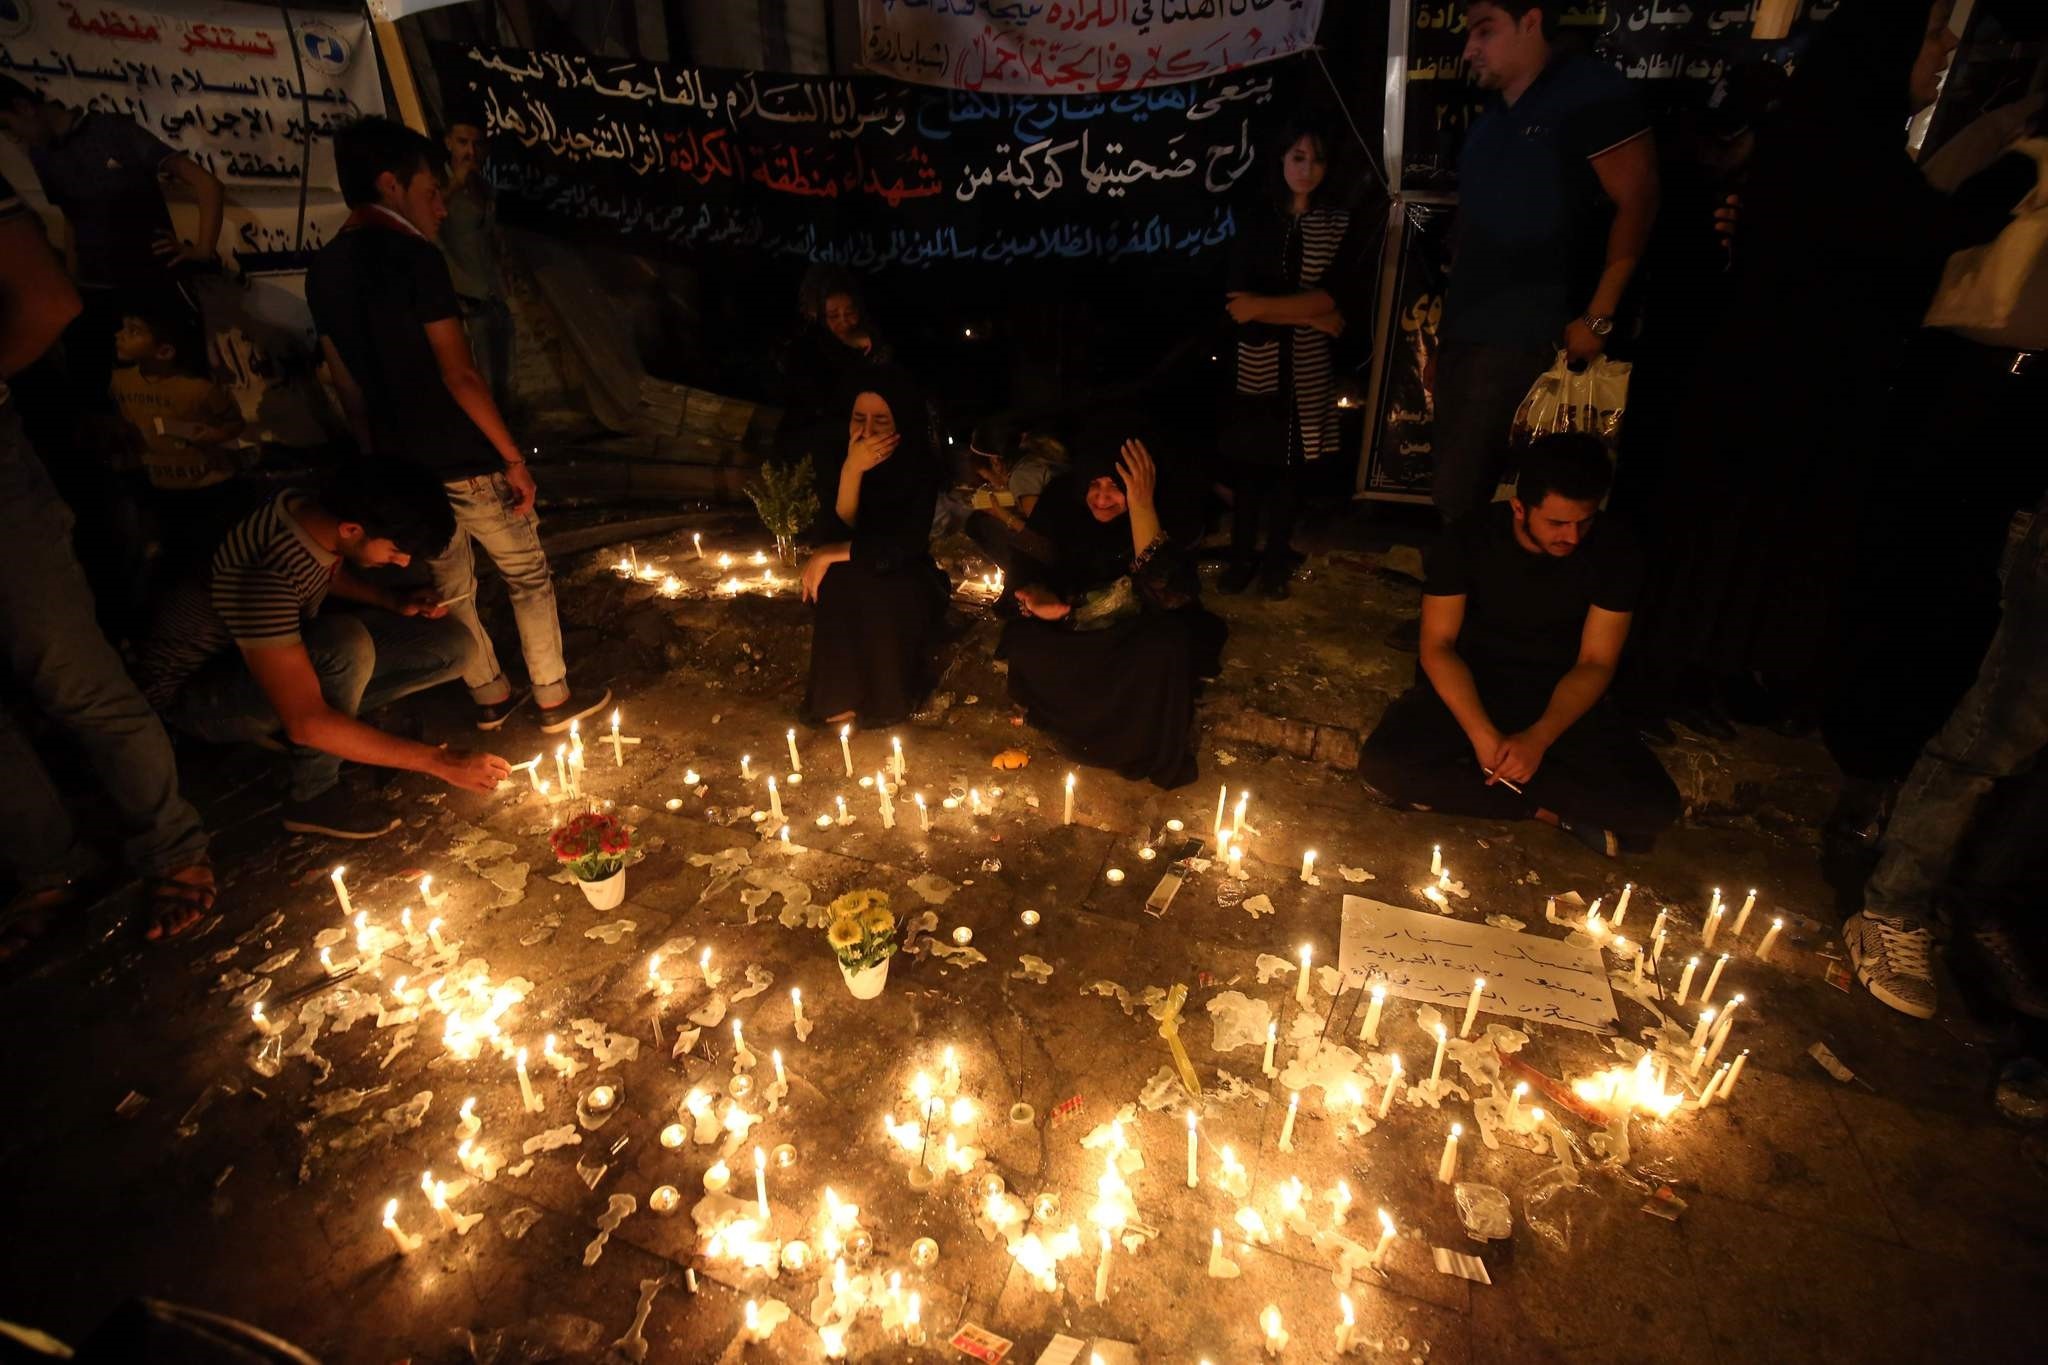 Iraqis light candles on July 5, 2016 at the site of a suicide car bomb attack which took place early on July 3 in Baghdad's Karrada neighbourhood killing at least 213 people and wounding more than 200. (AFP Photo)